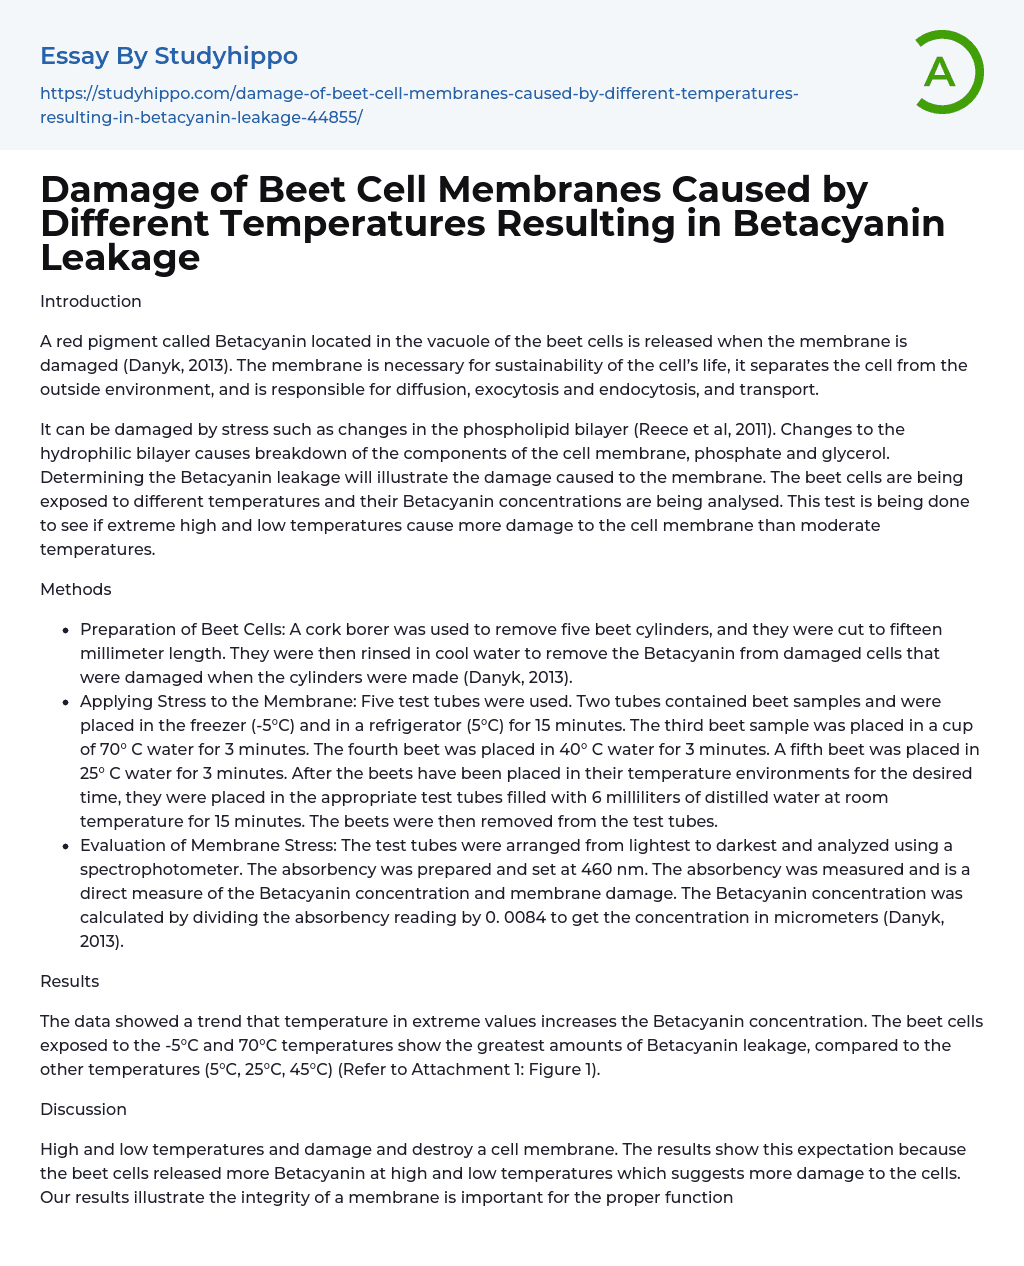 Betacyanin Release from Damaged Beet Cell Membranes